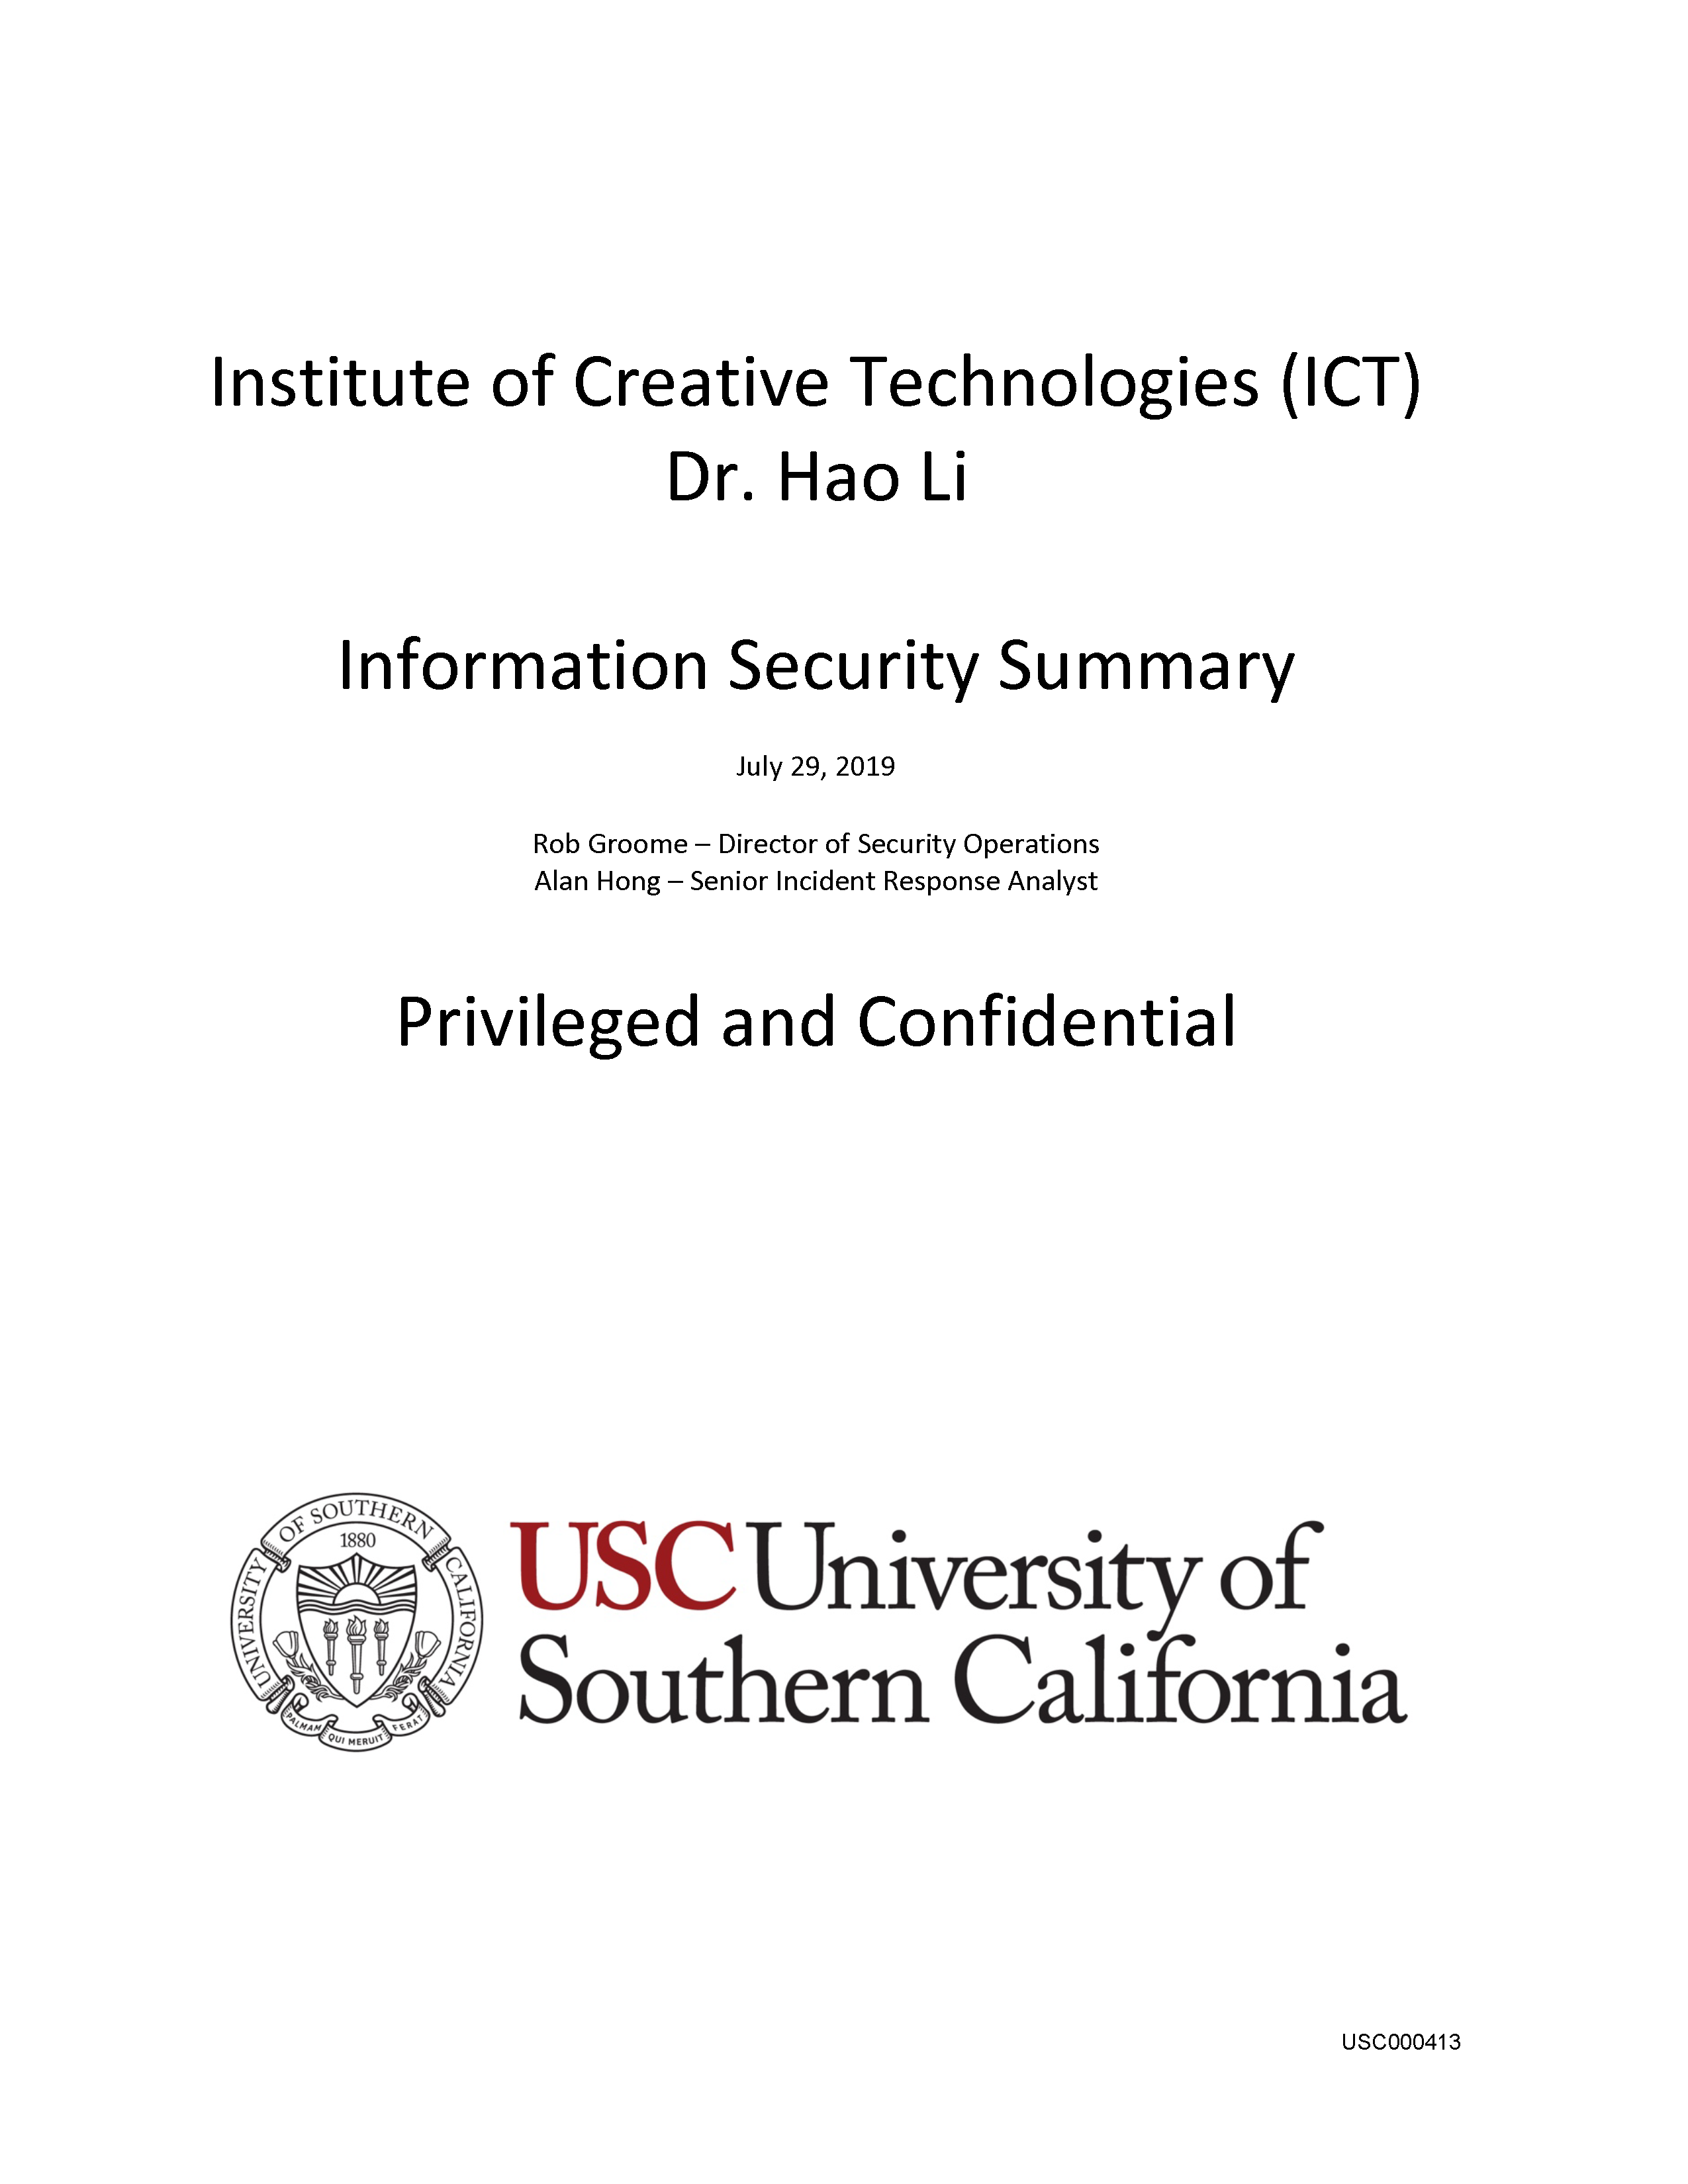 USC ICT's Report on Hao Li's Destruction of Evidence Page 8